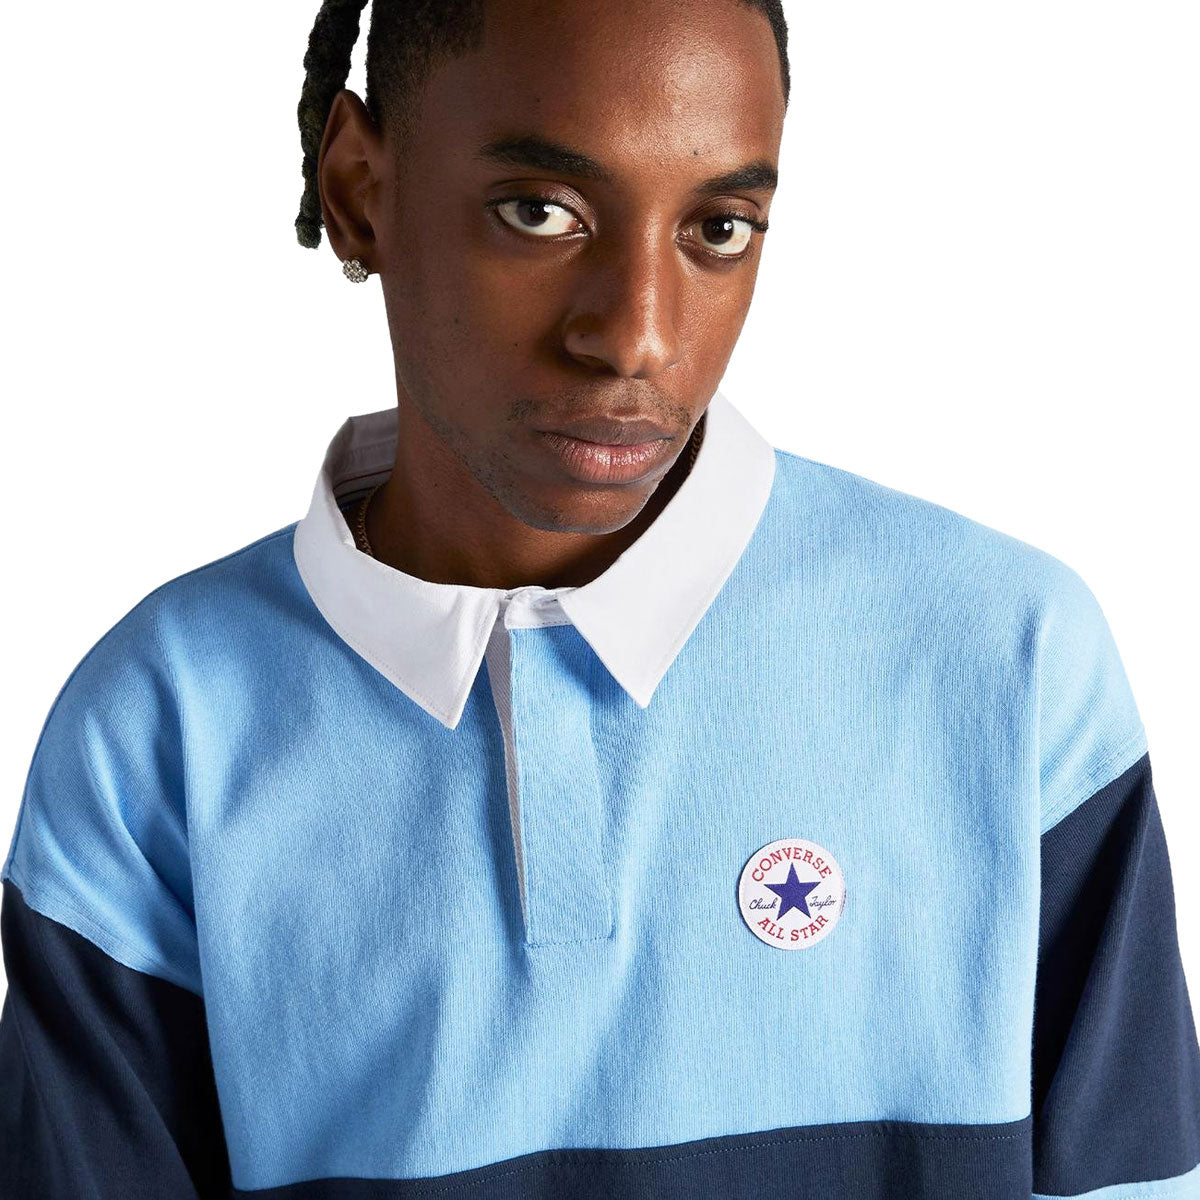 Converse All Star Long Sleeve Rugby Jersey - Navy/Light Blue image 4